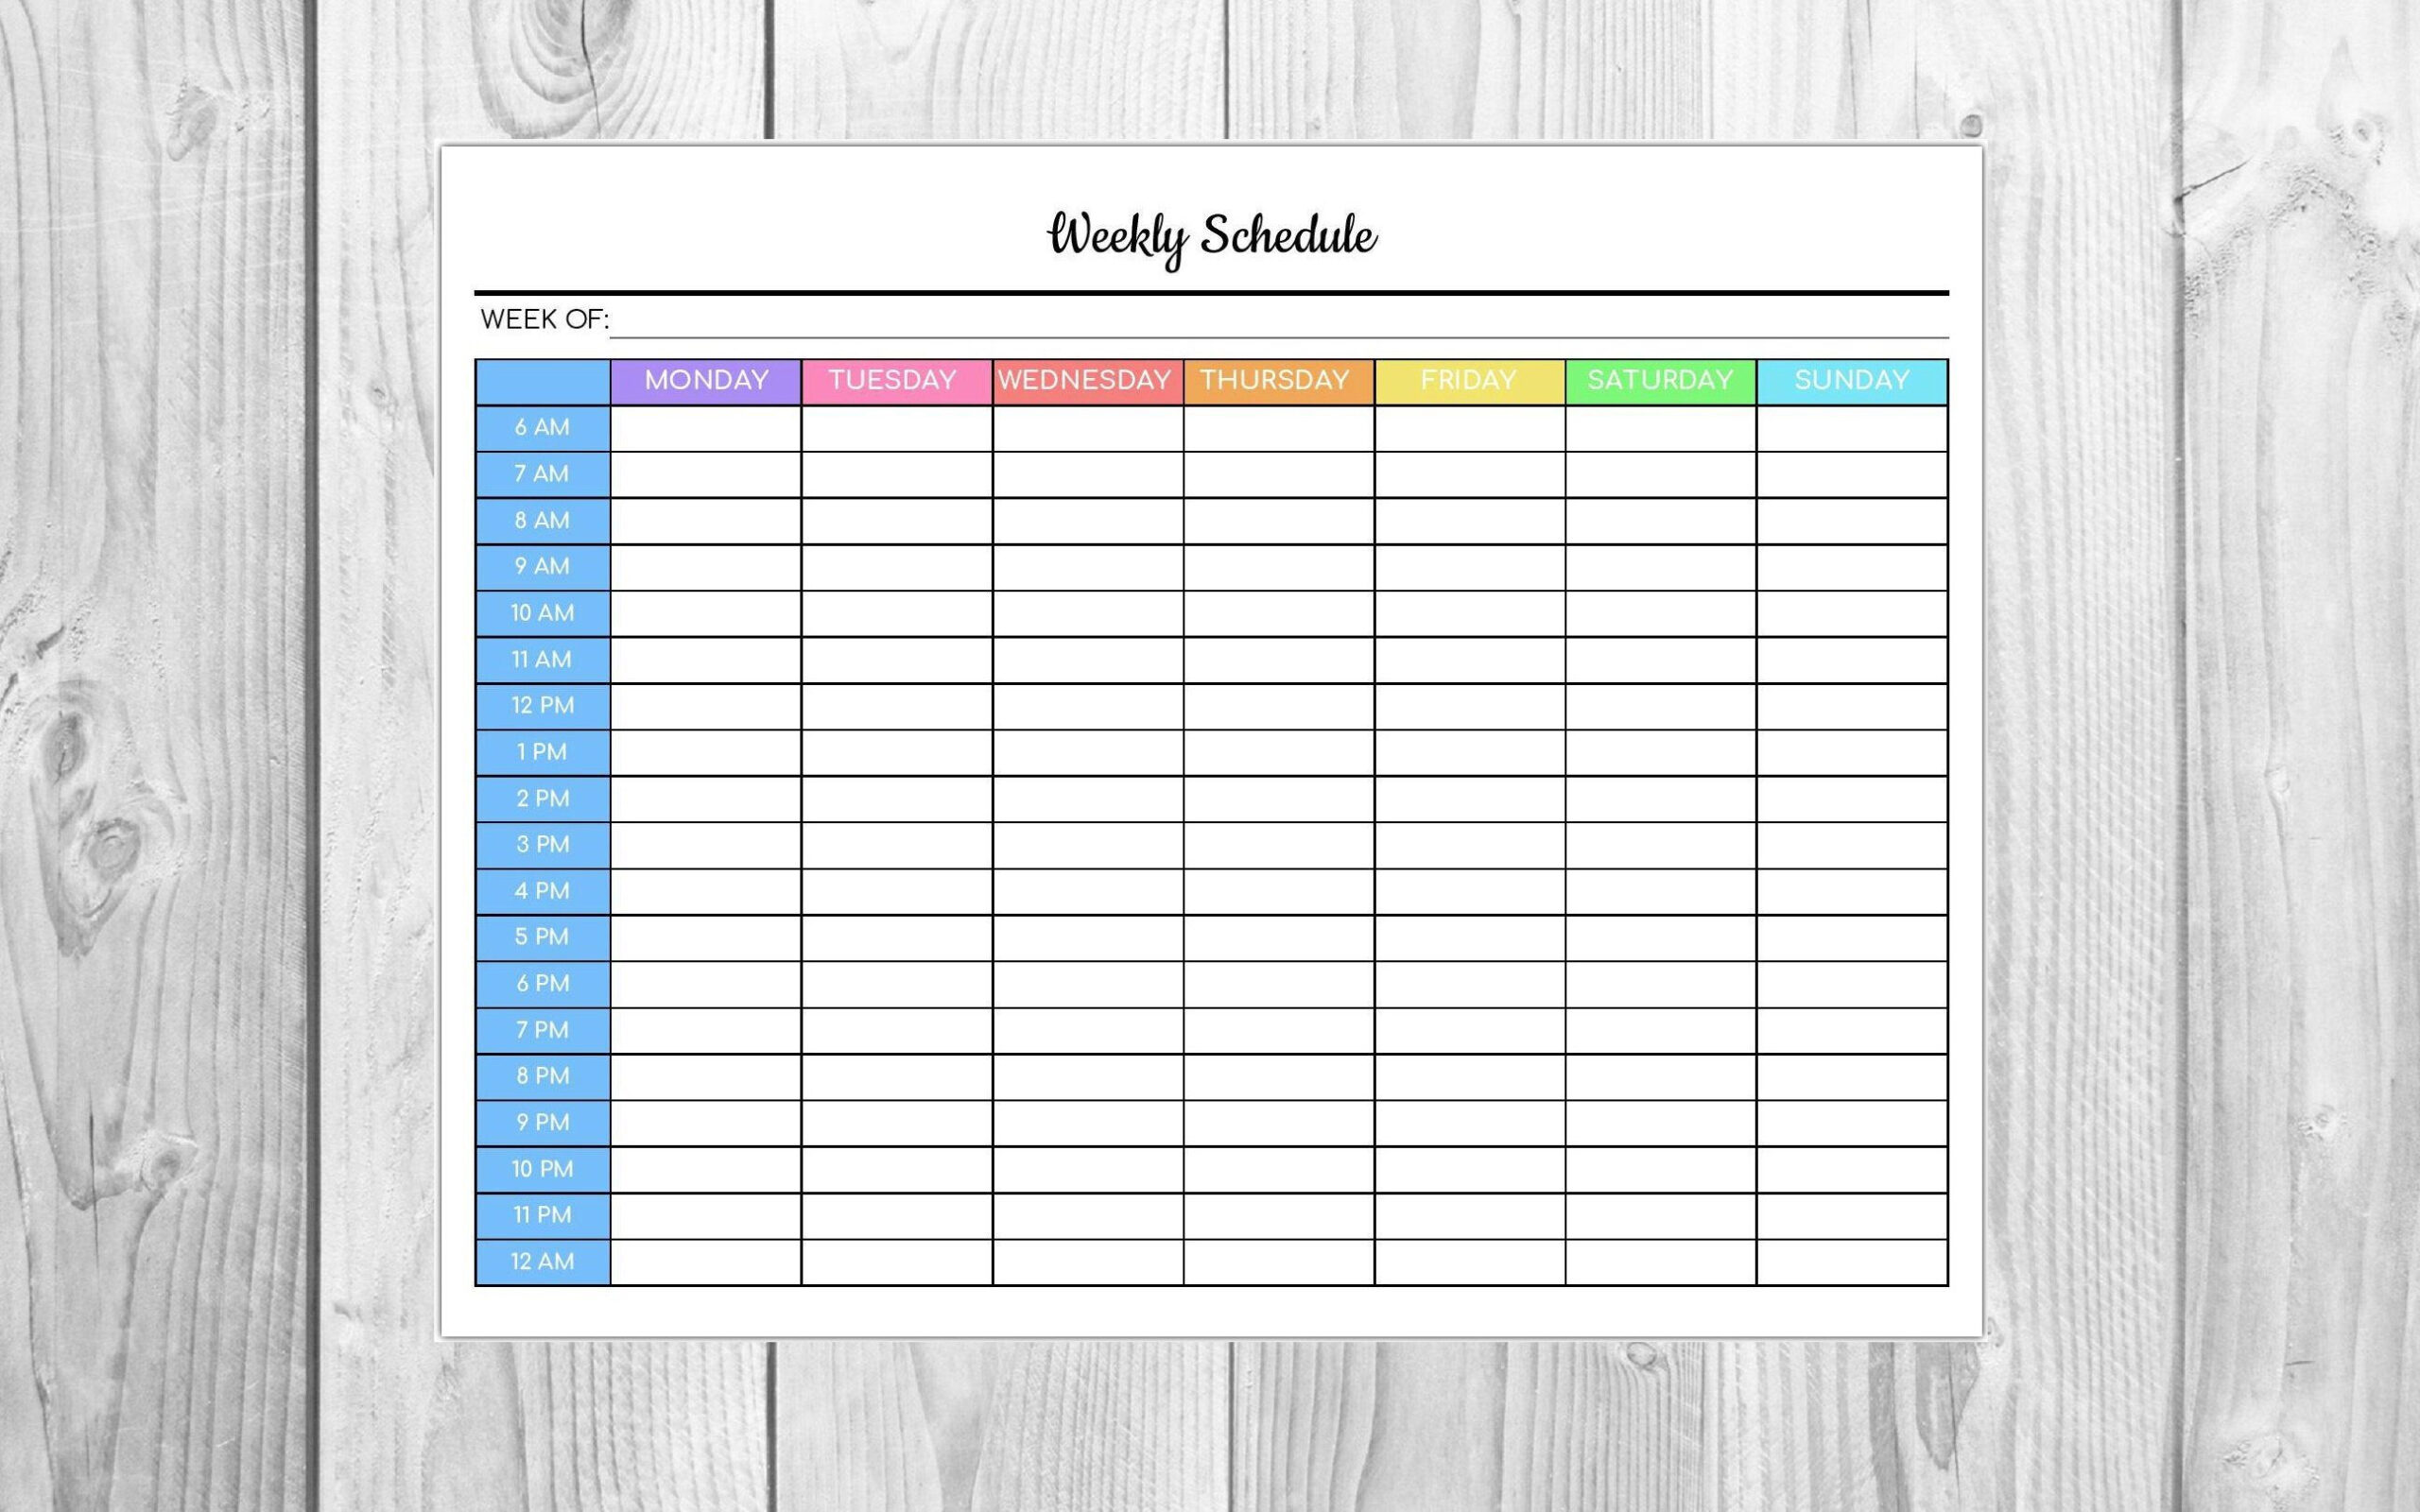 Weekly Schedule Editable Pdf Colorful | Hourly Schedule pertaining to Free Hourly Planner Pdf